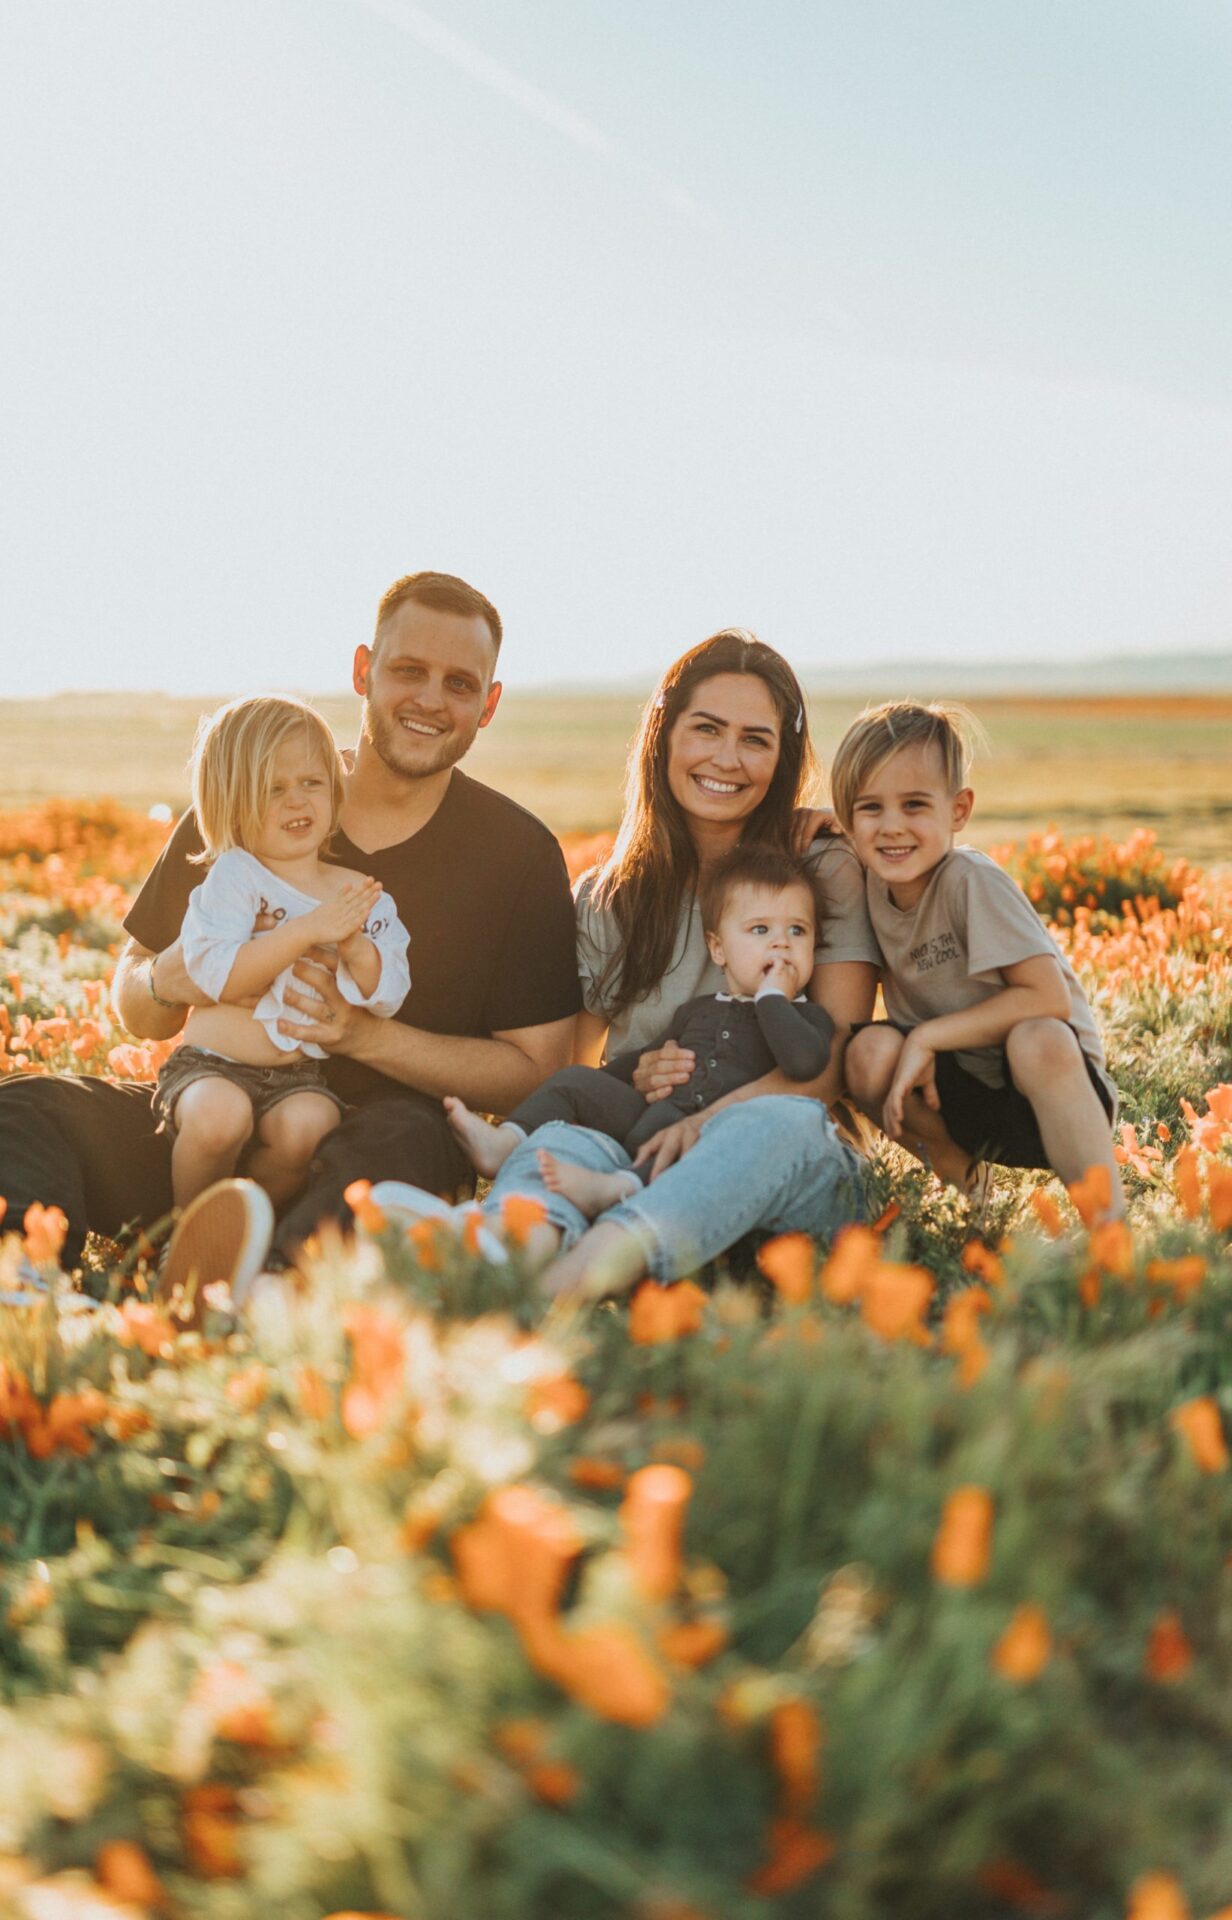 Smiling family of a mother, father and three young children sit in a green field dotted with orange flowers.